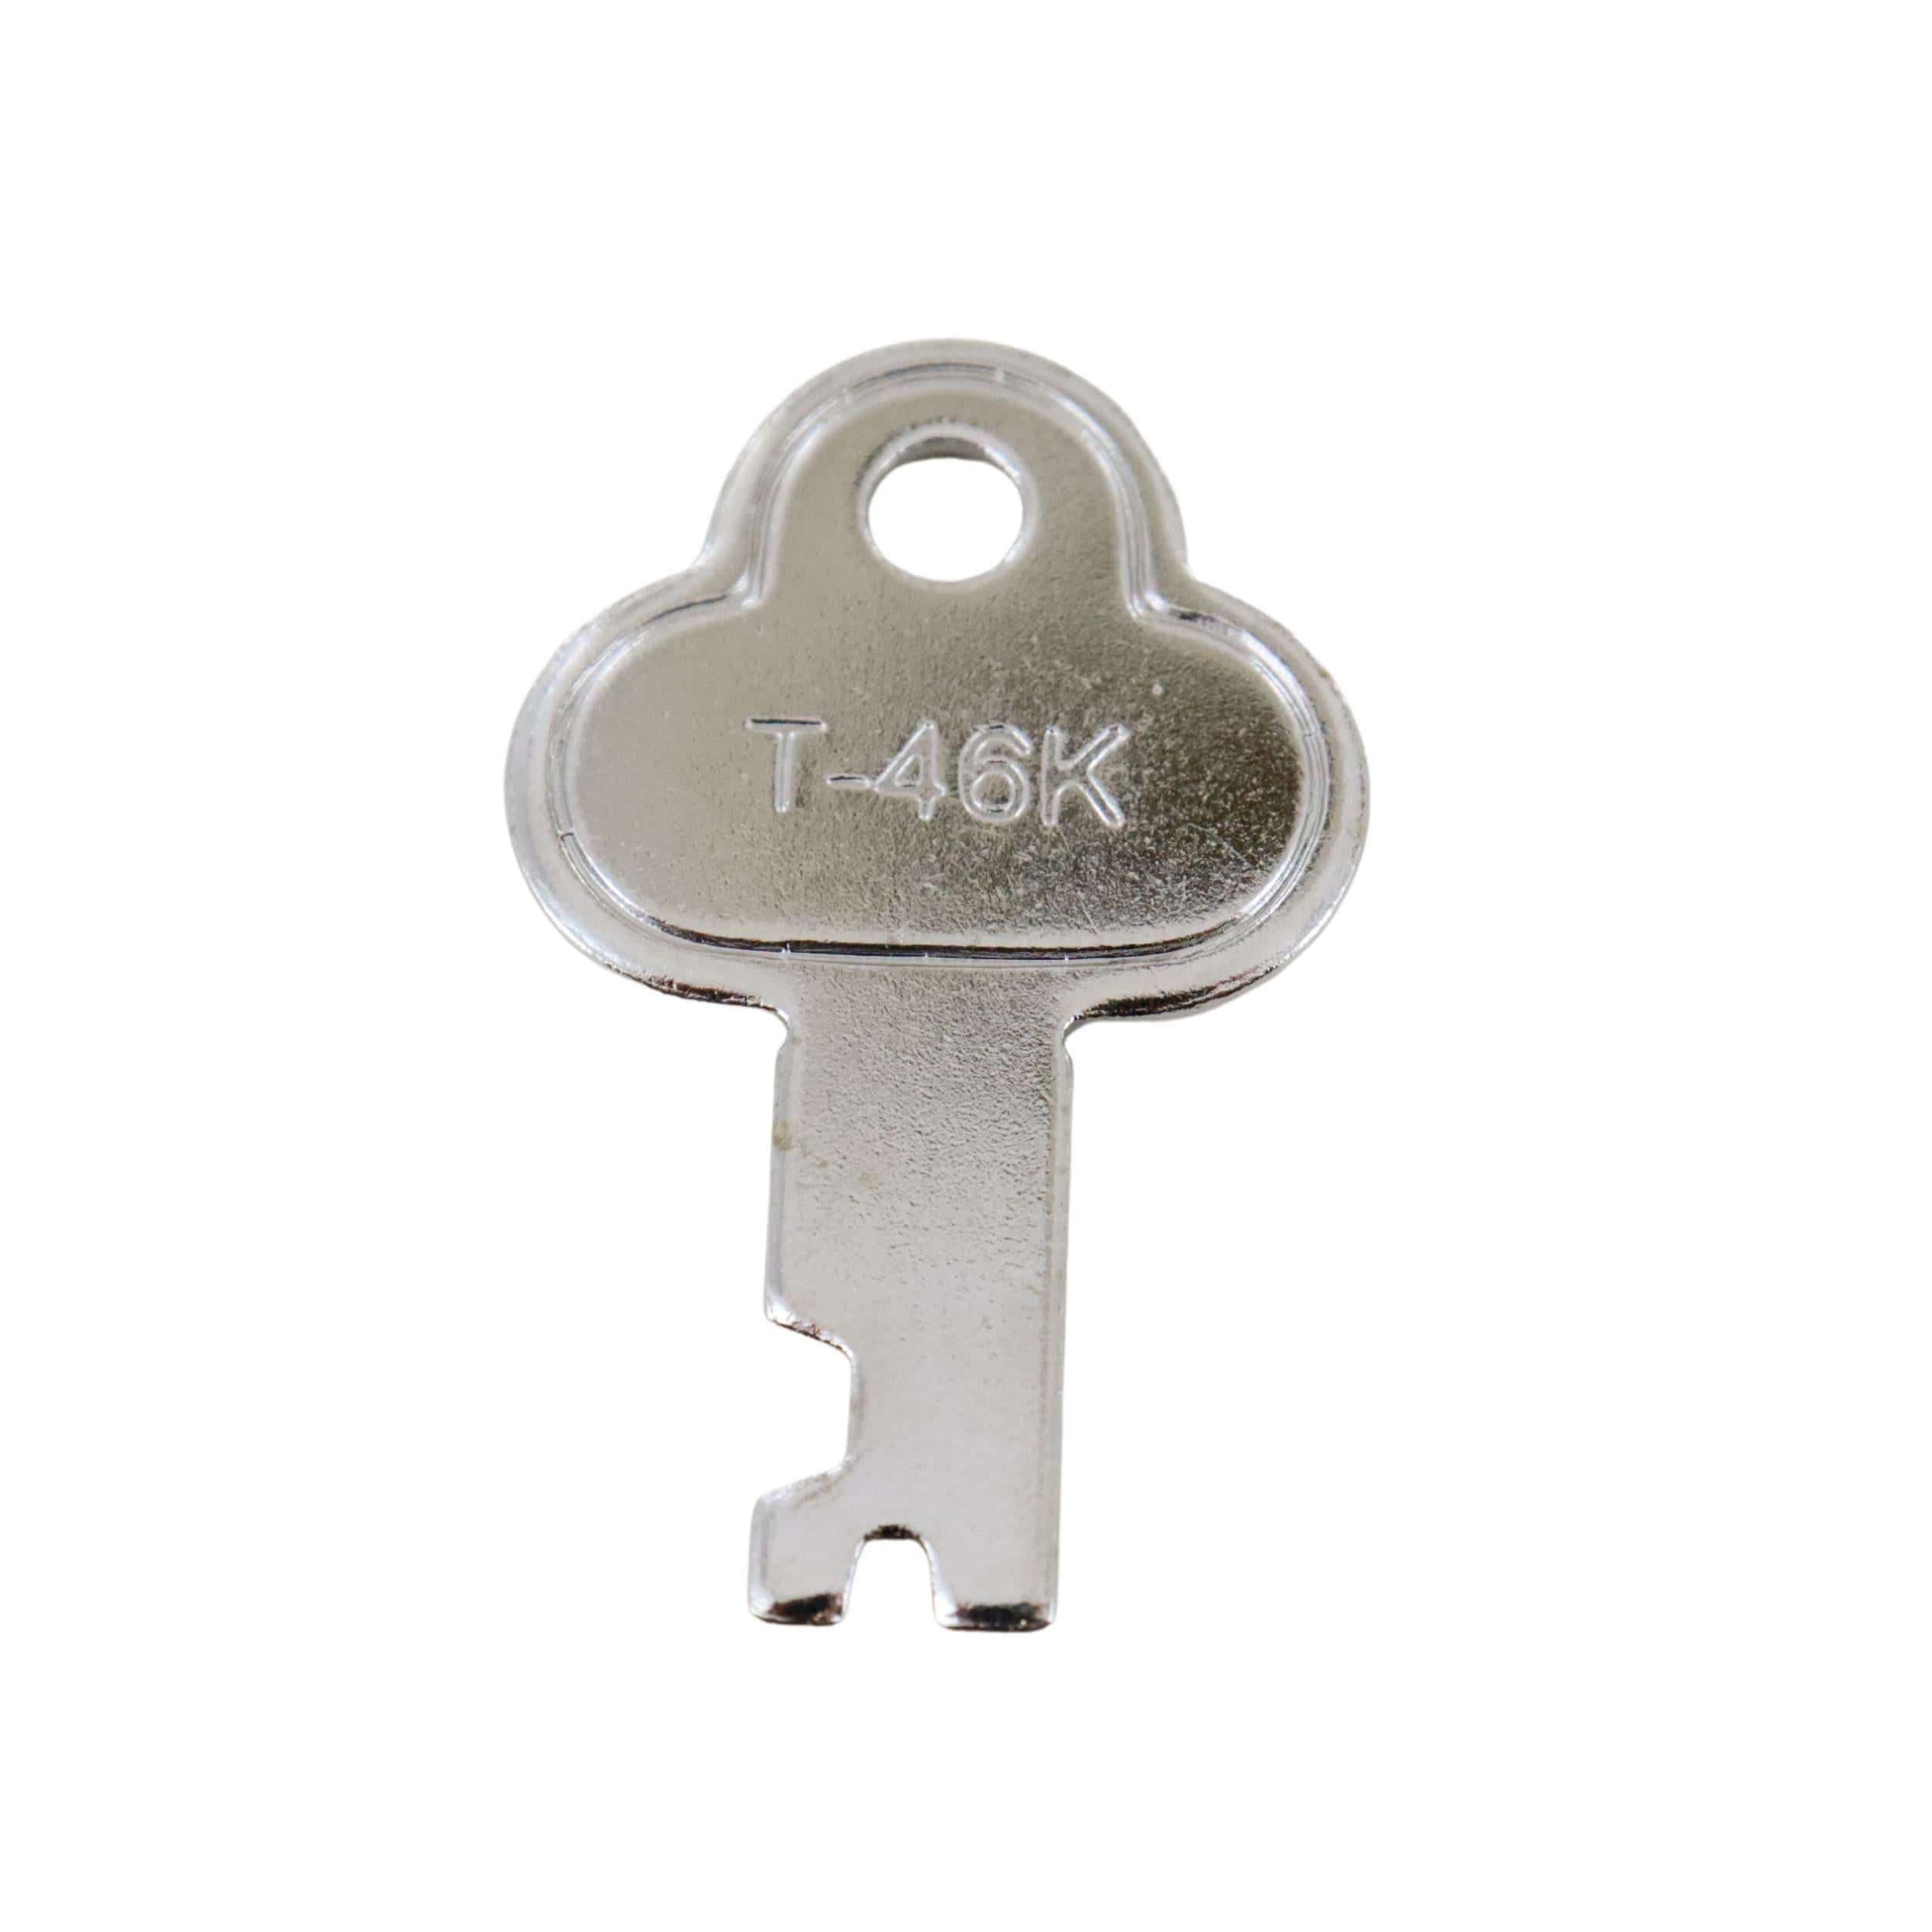 Extra Trunk Lock Key for G-1 and G-3